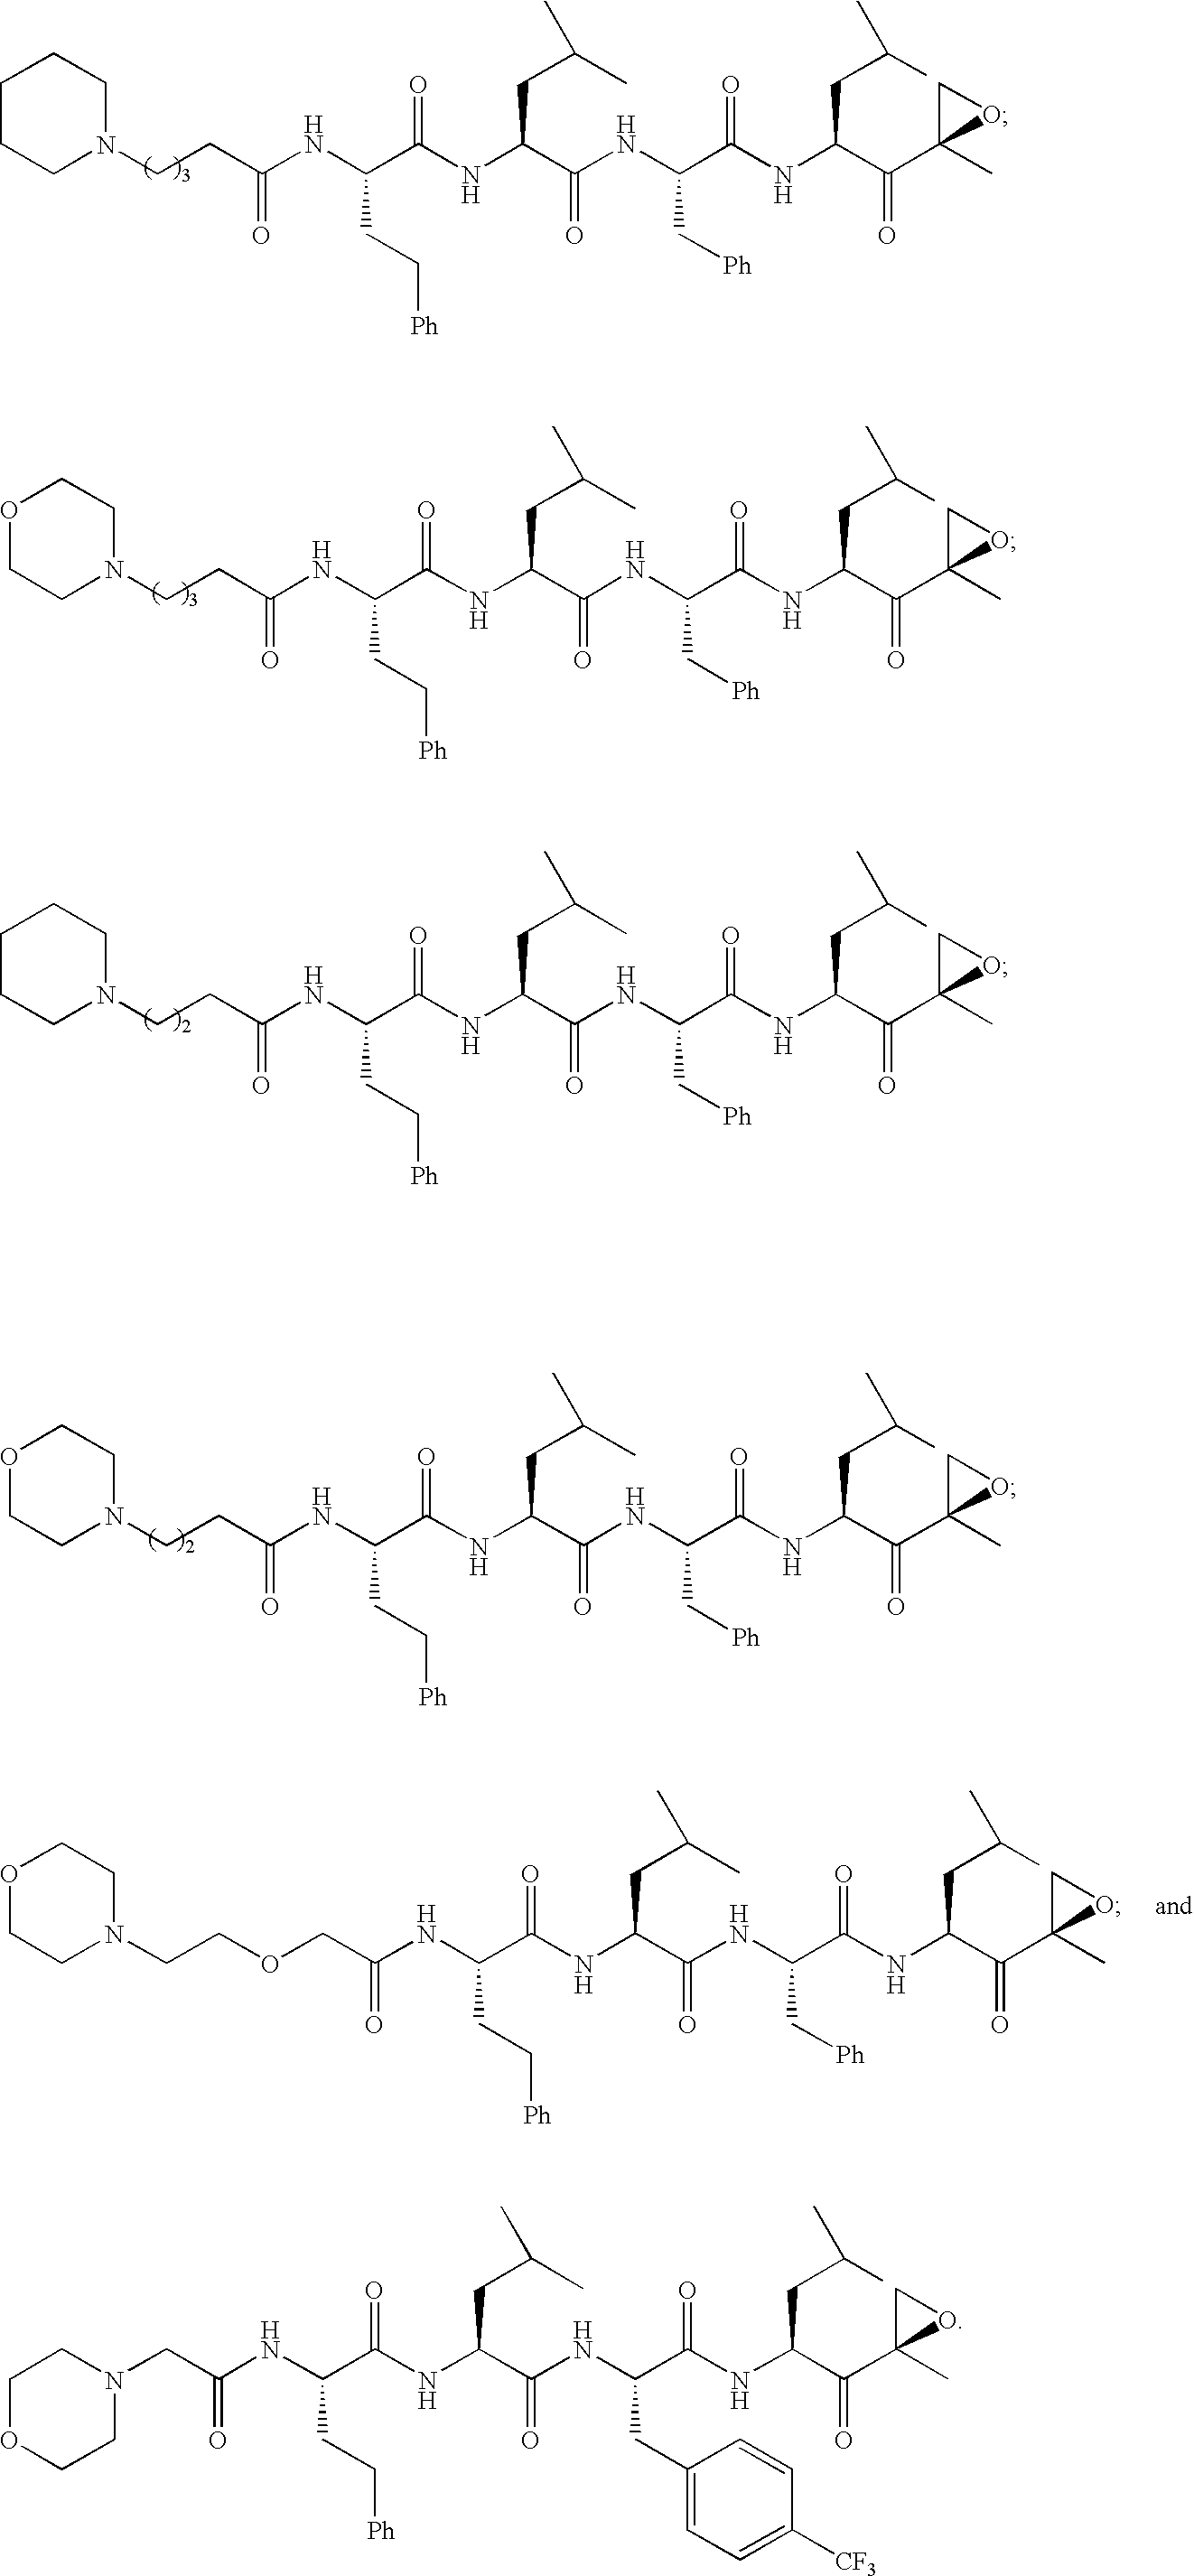 Compounds for proteasome enzyme inhibition